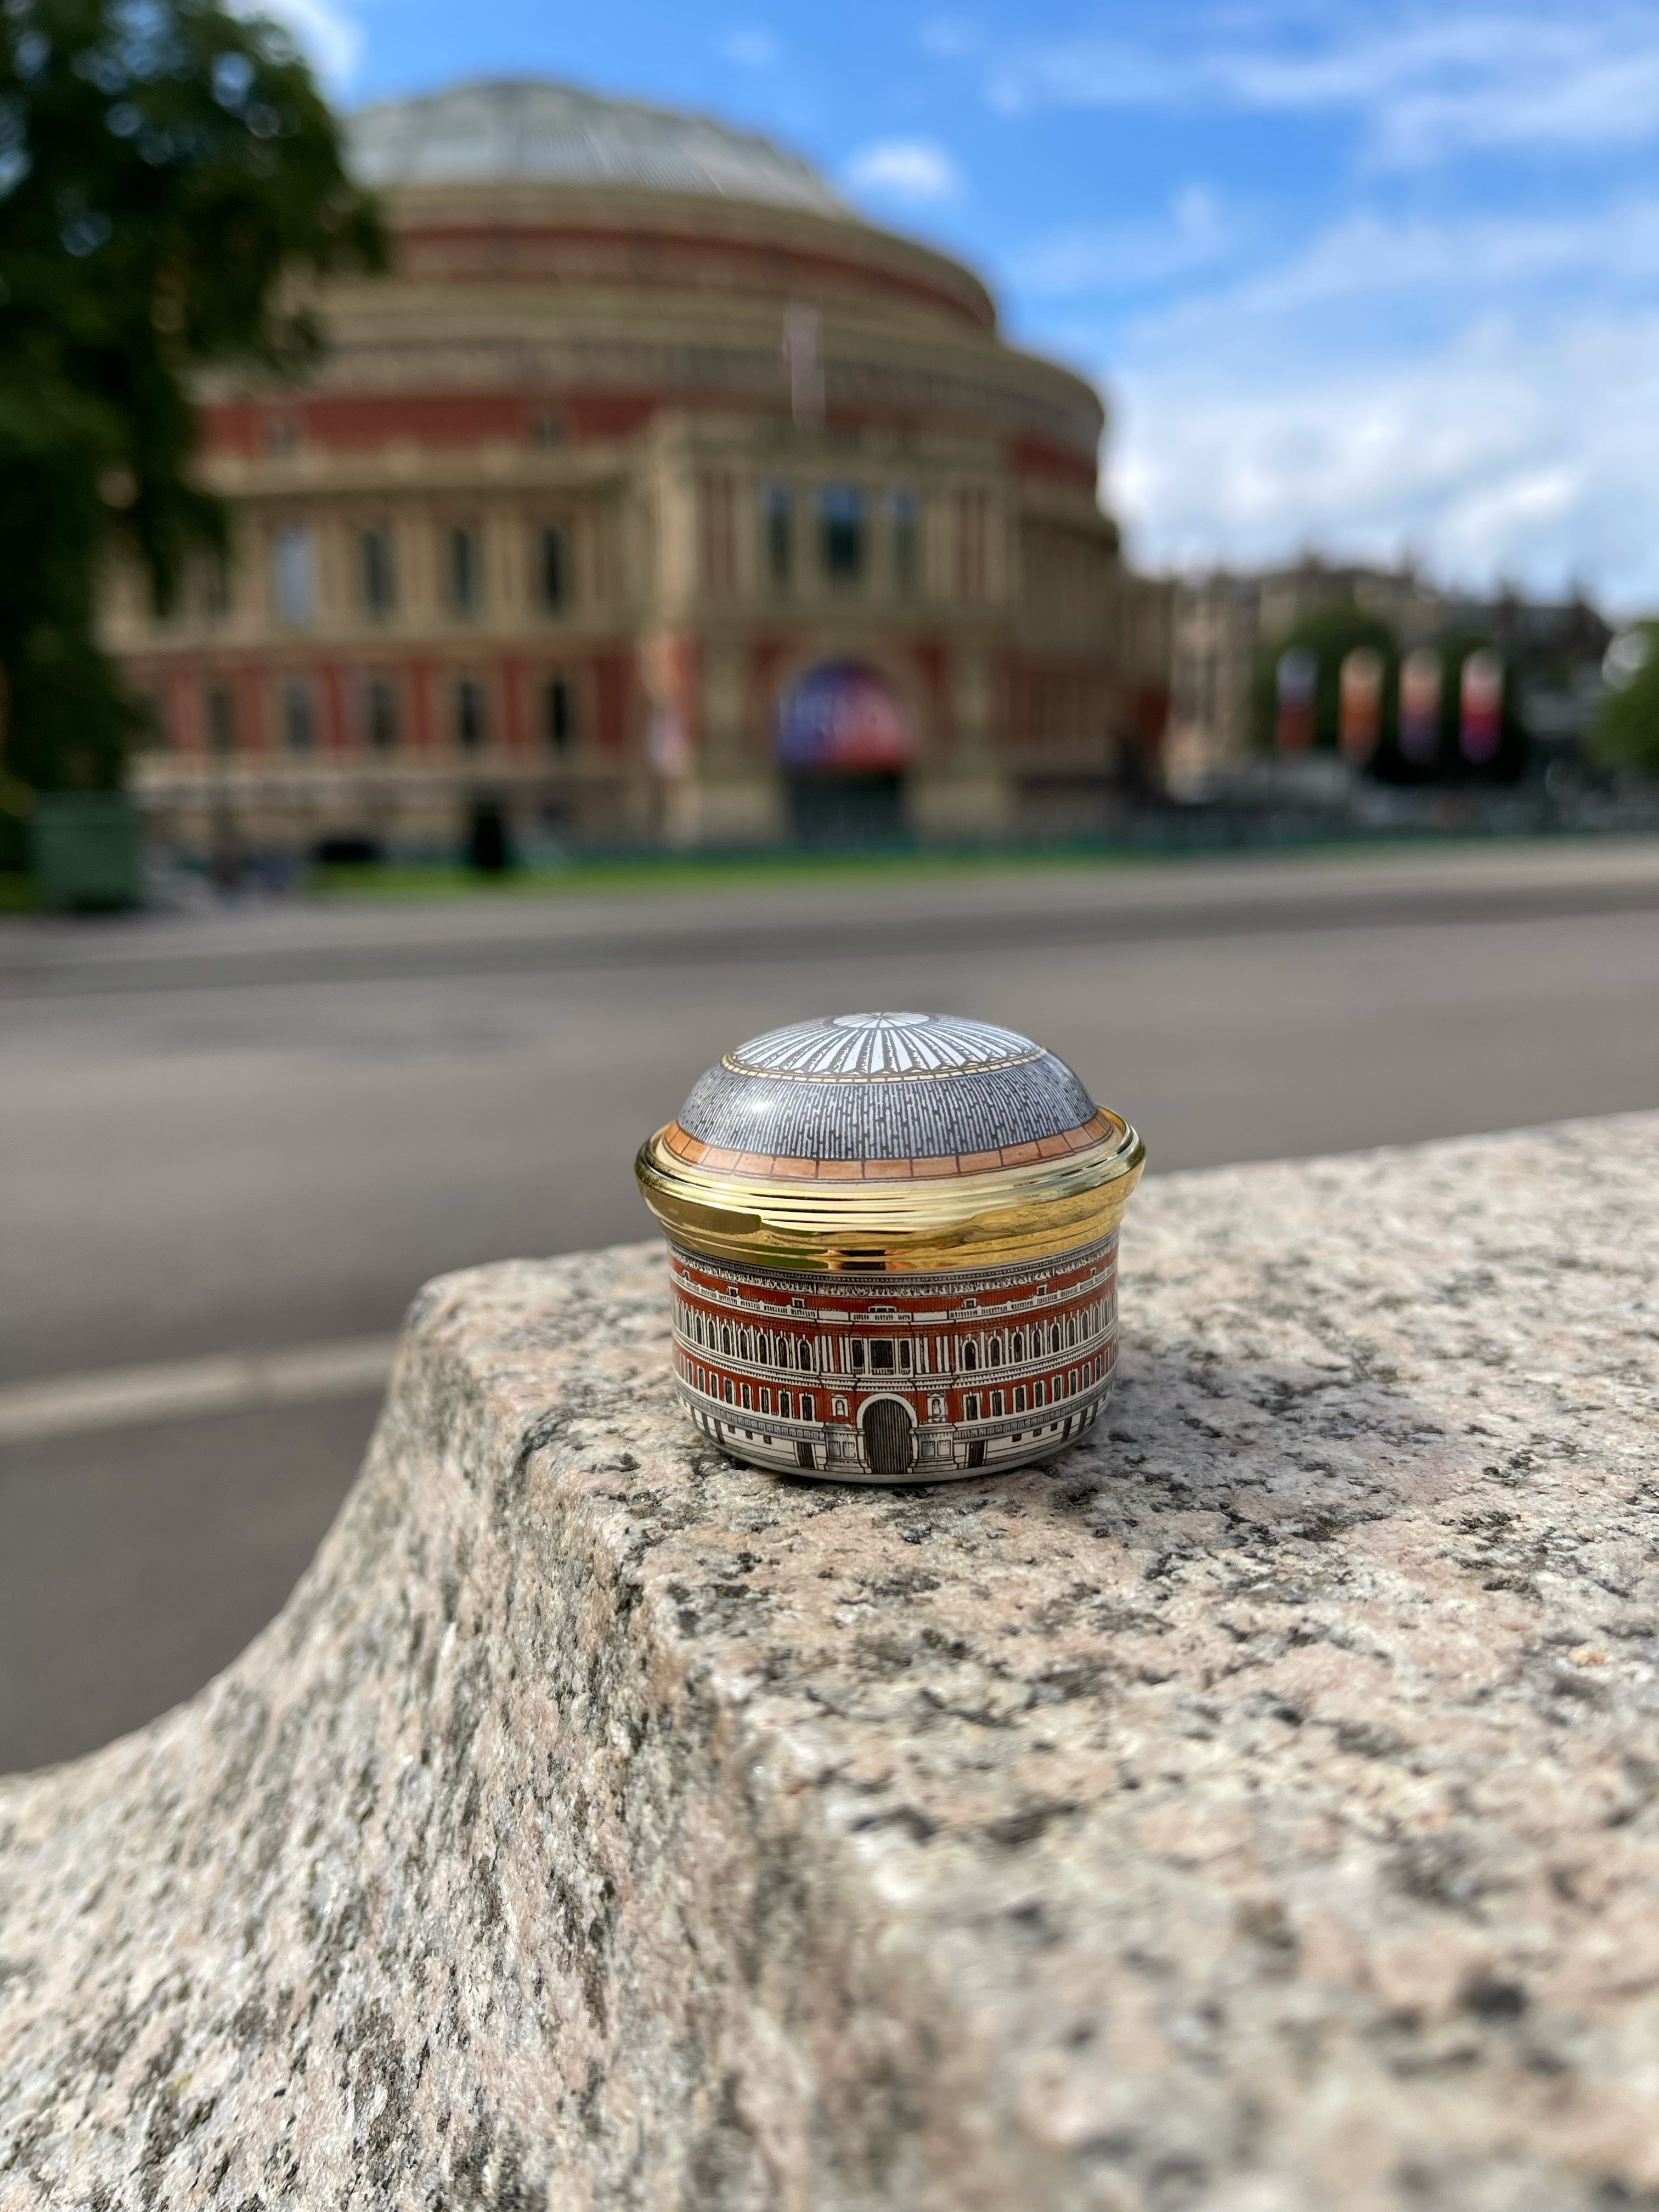 Image of Halcyon Days' Royal Albert Hall Musical enamel box sitting in front of the Royal Albert Hall